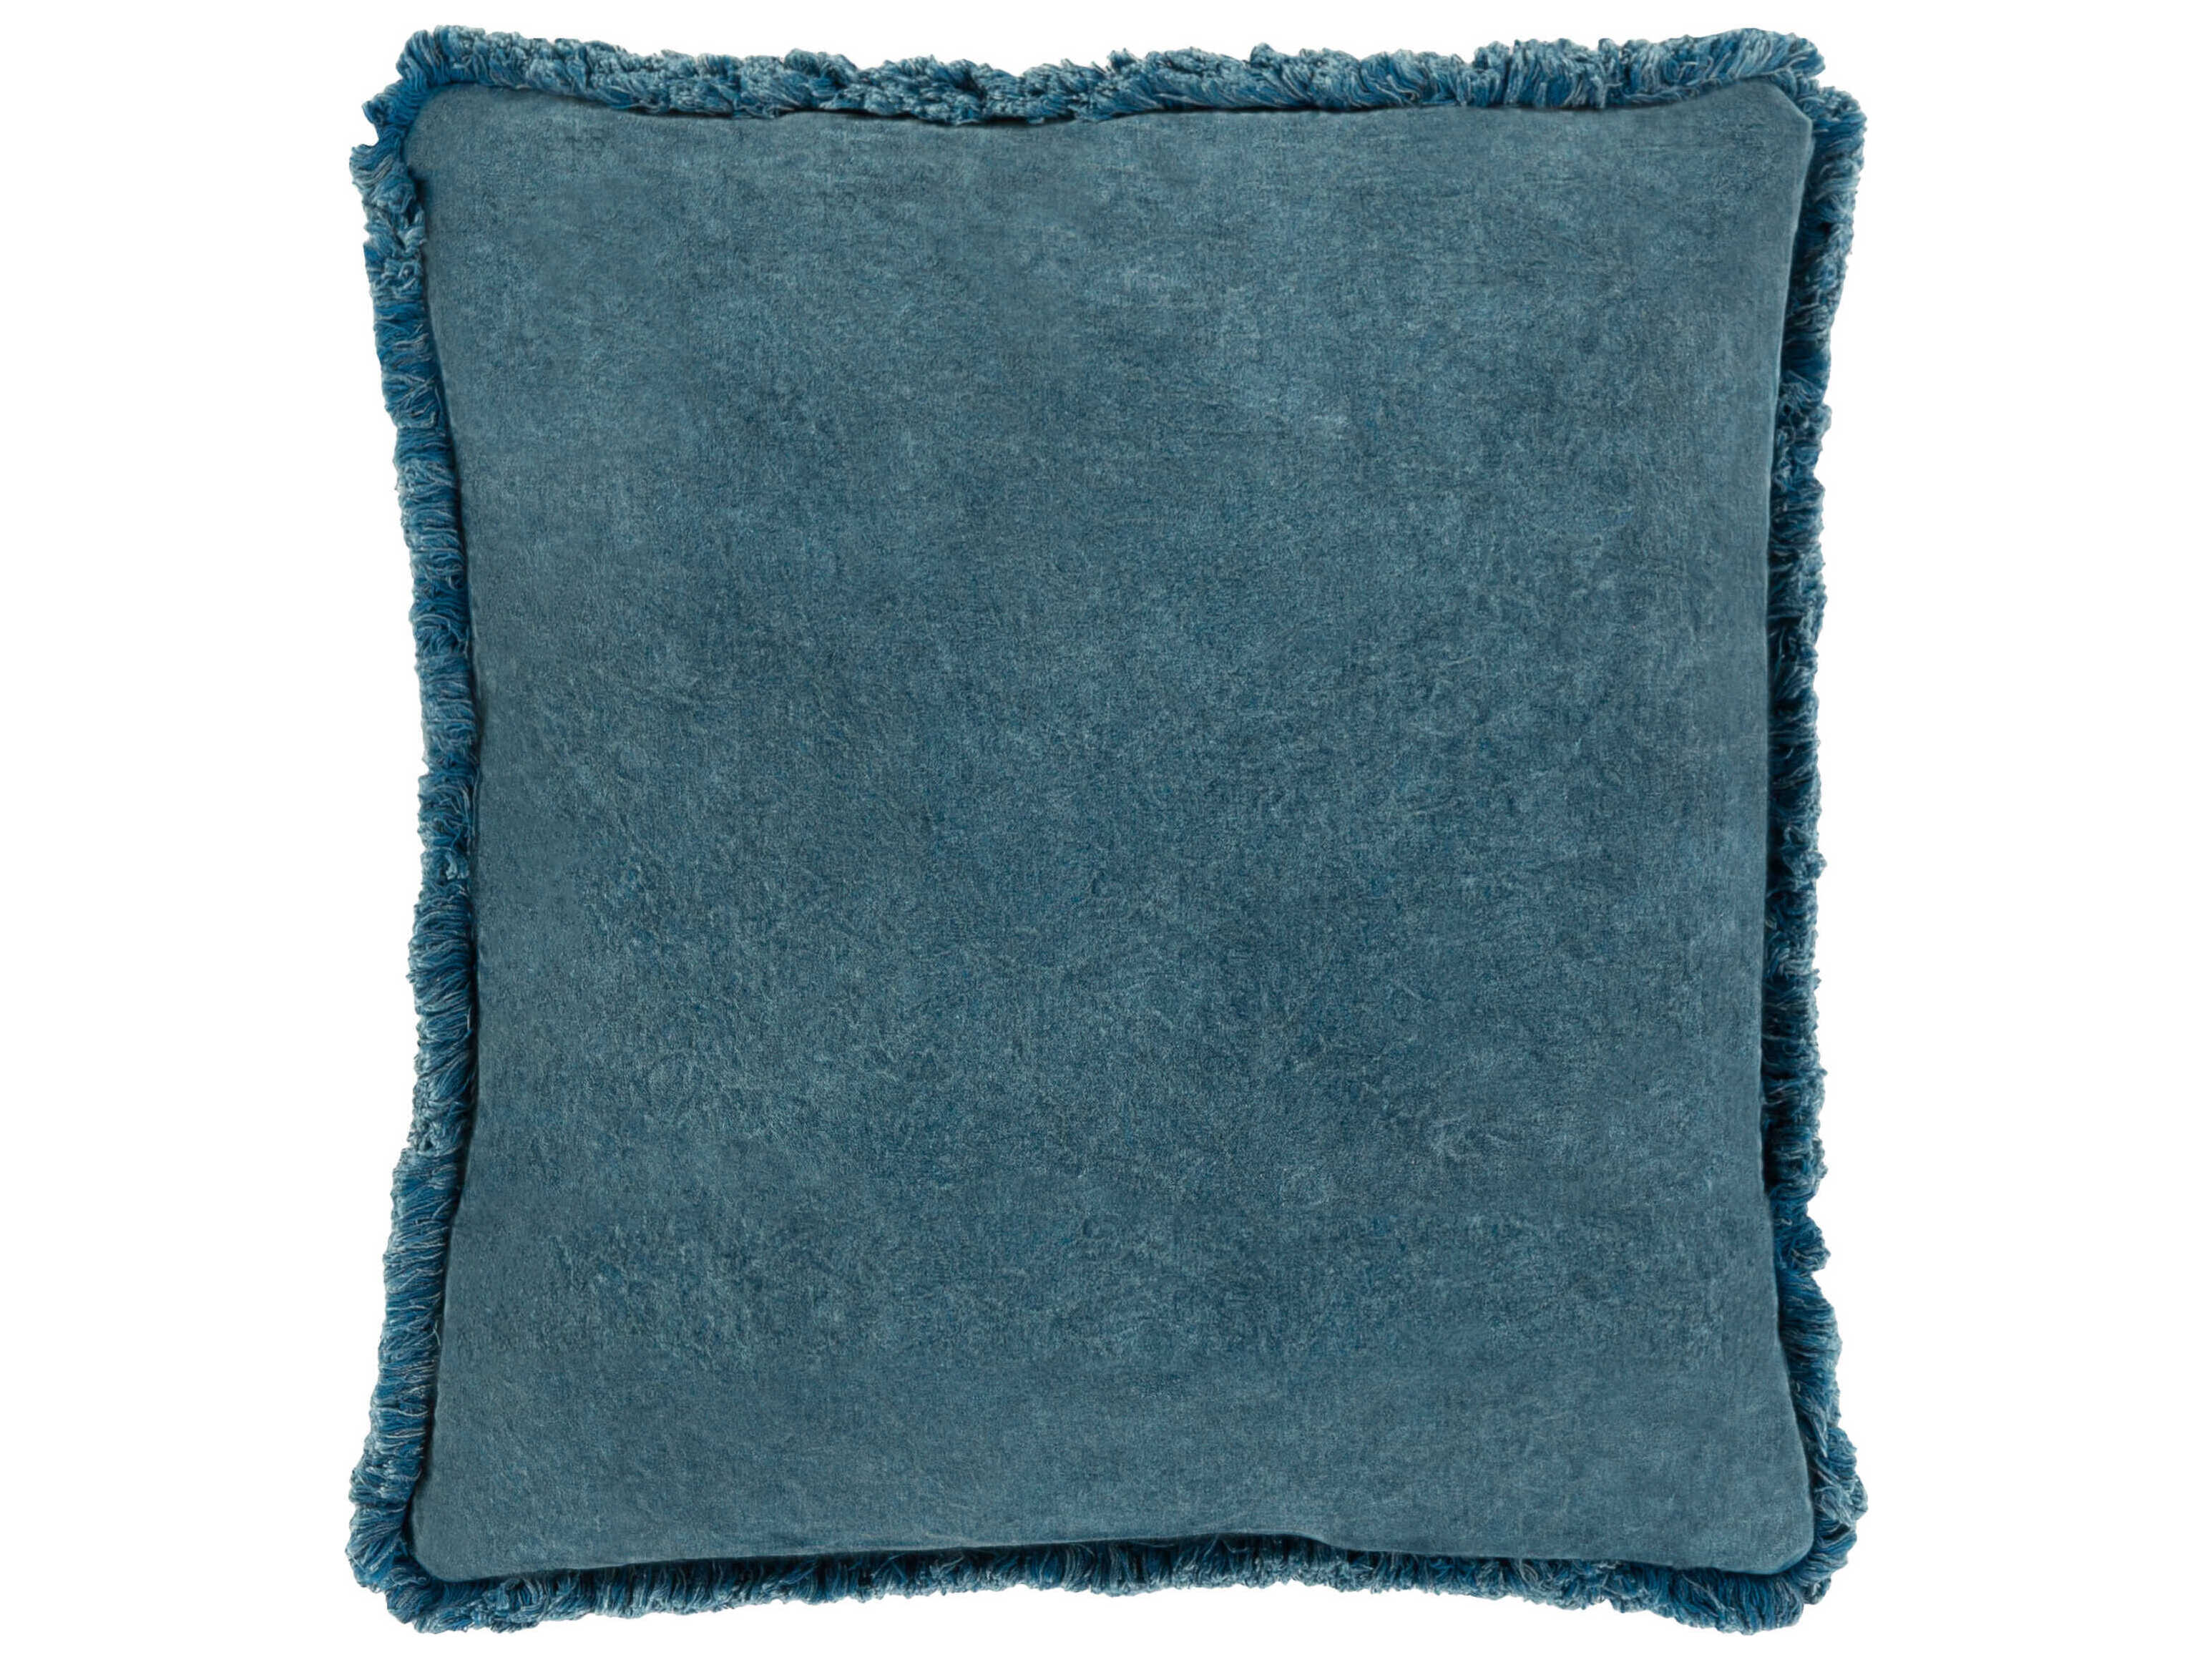 Surya Washed Cotton Velvet Charcoal Pillow | SYWCV002